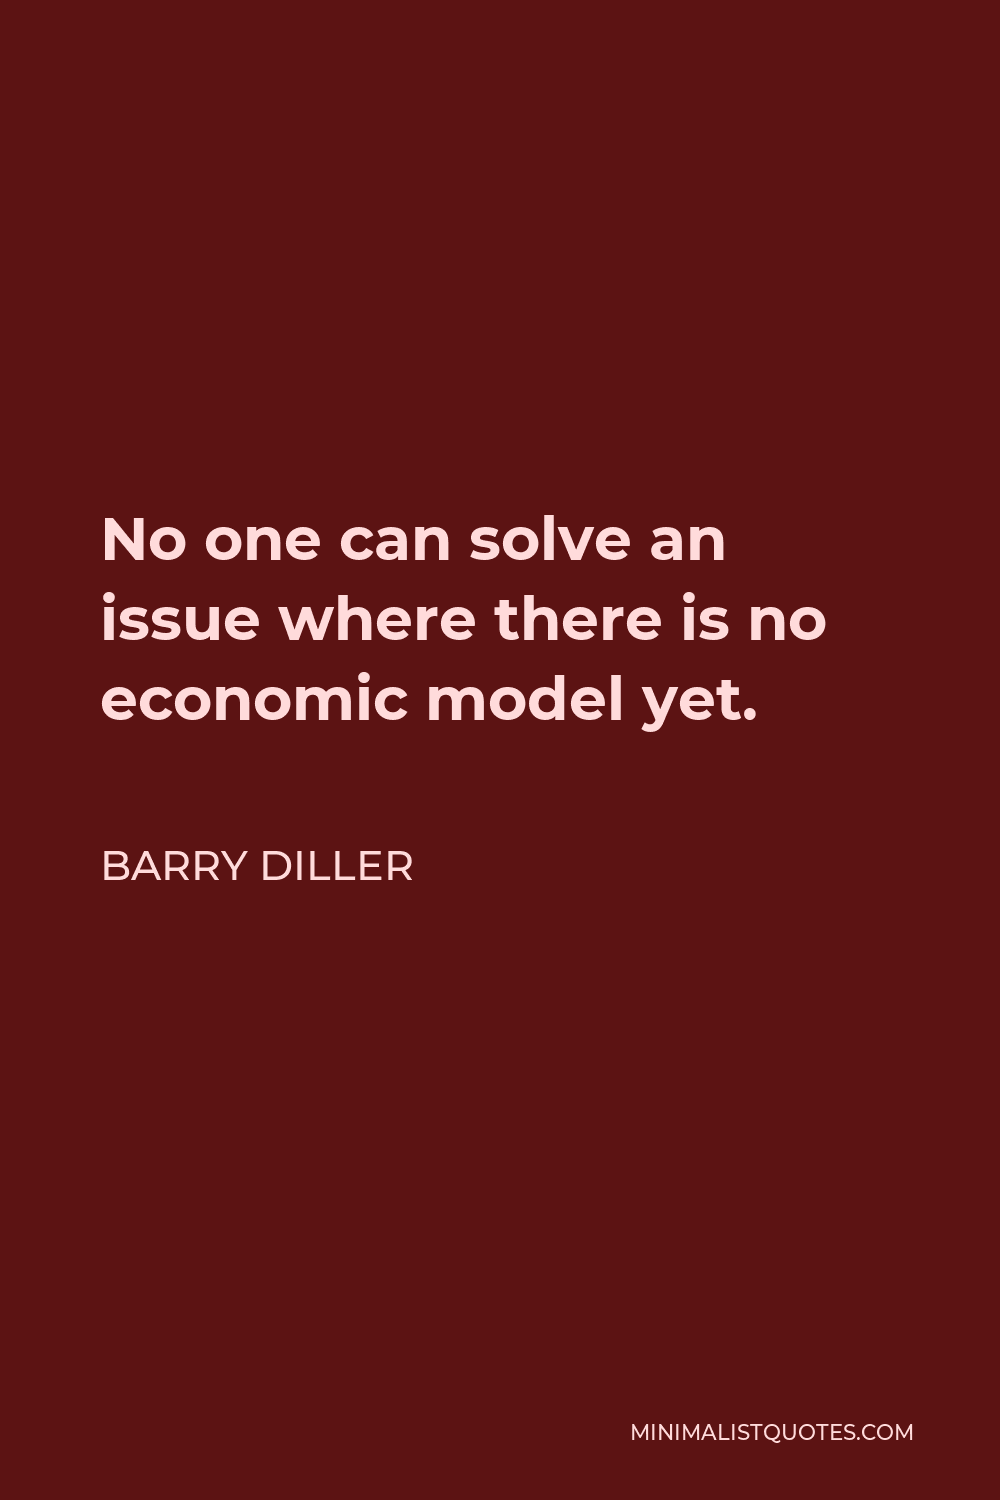 Barry Diller Quote - No one can solve an issue where there is no economic model yet.